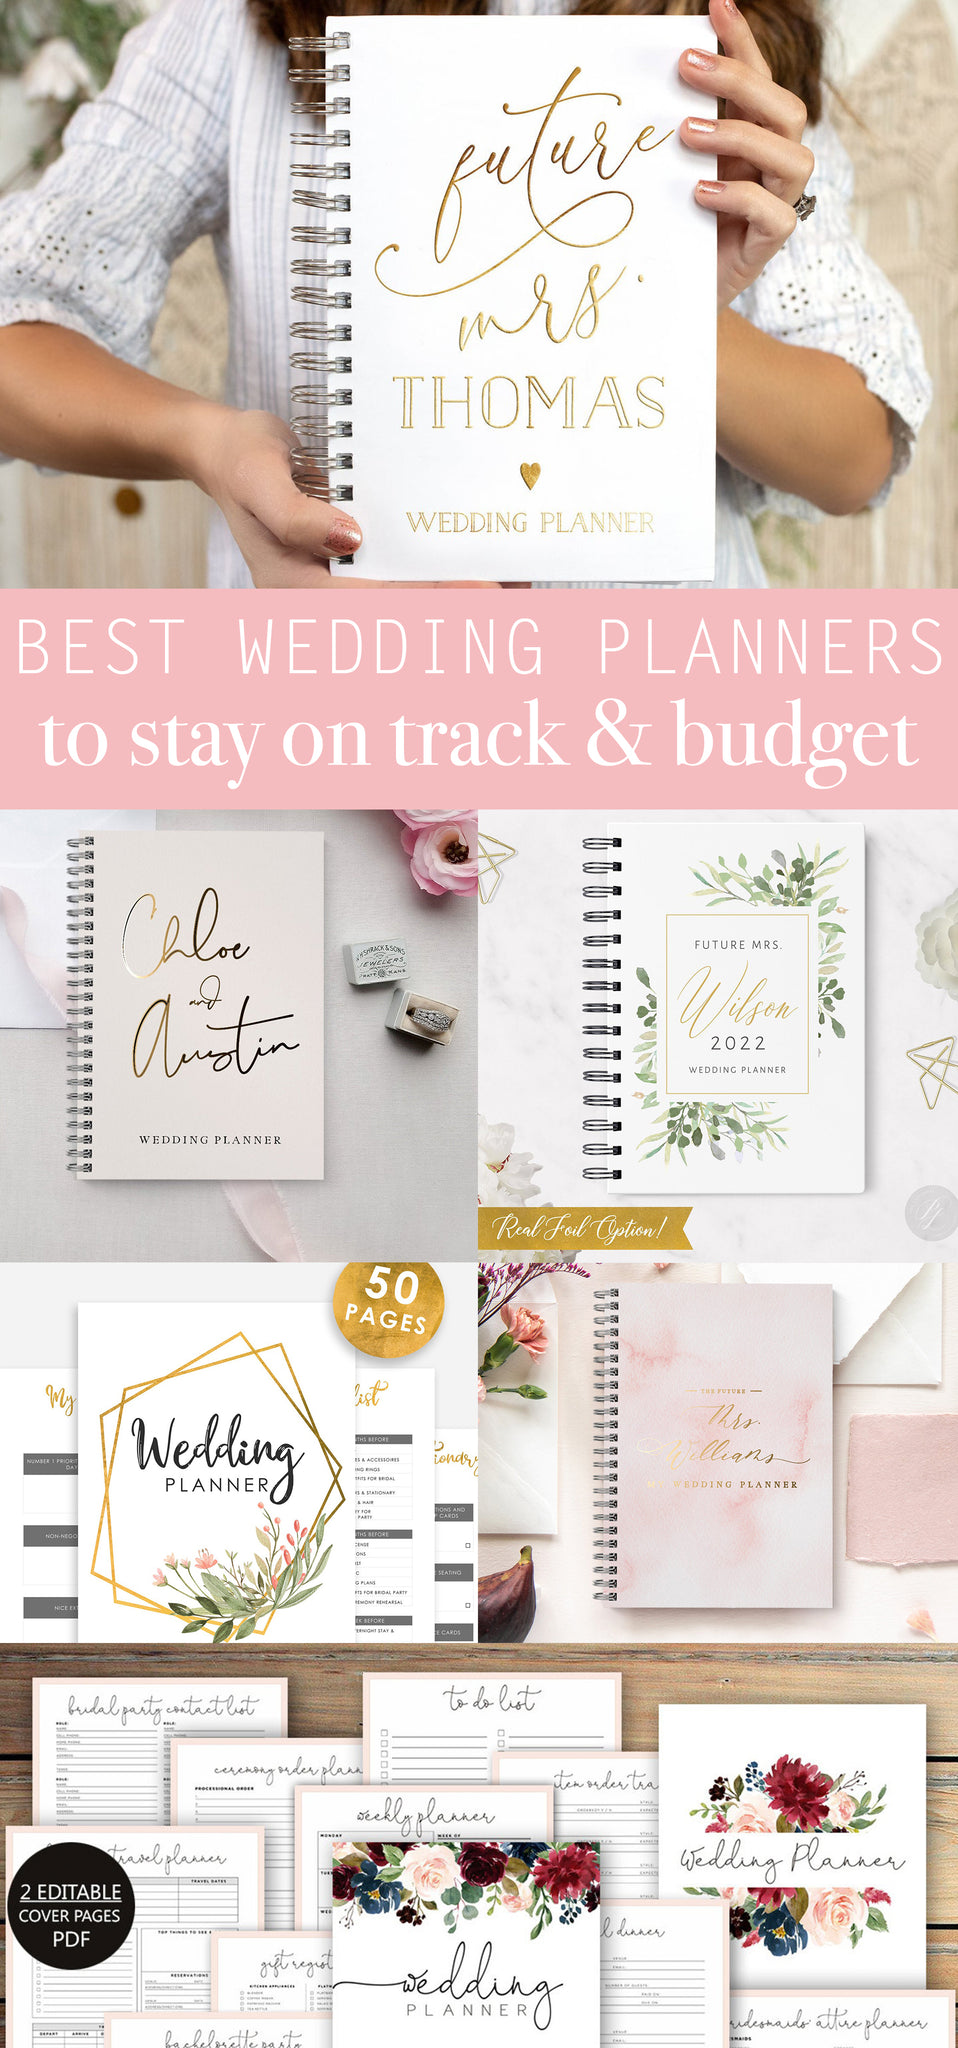 Best Wedding Planners to Stay on Track and Budget - Custom Wedding Planner - Personalized Wedding Planner Book - Pretty Collected